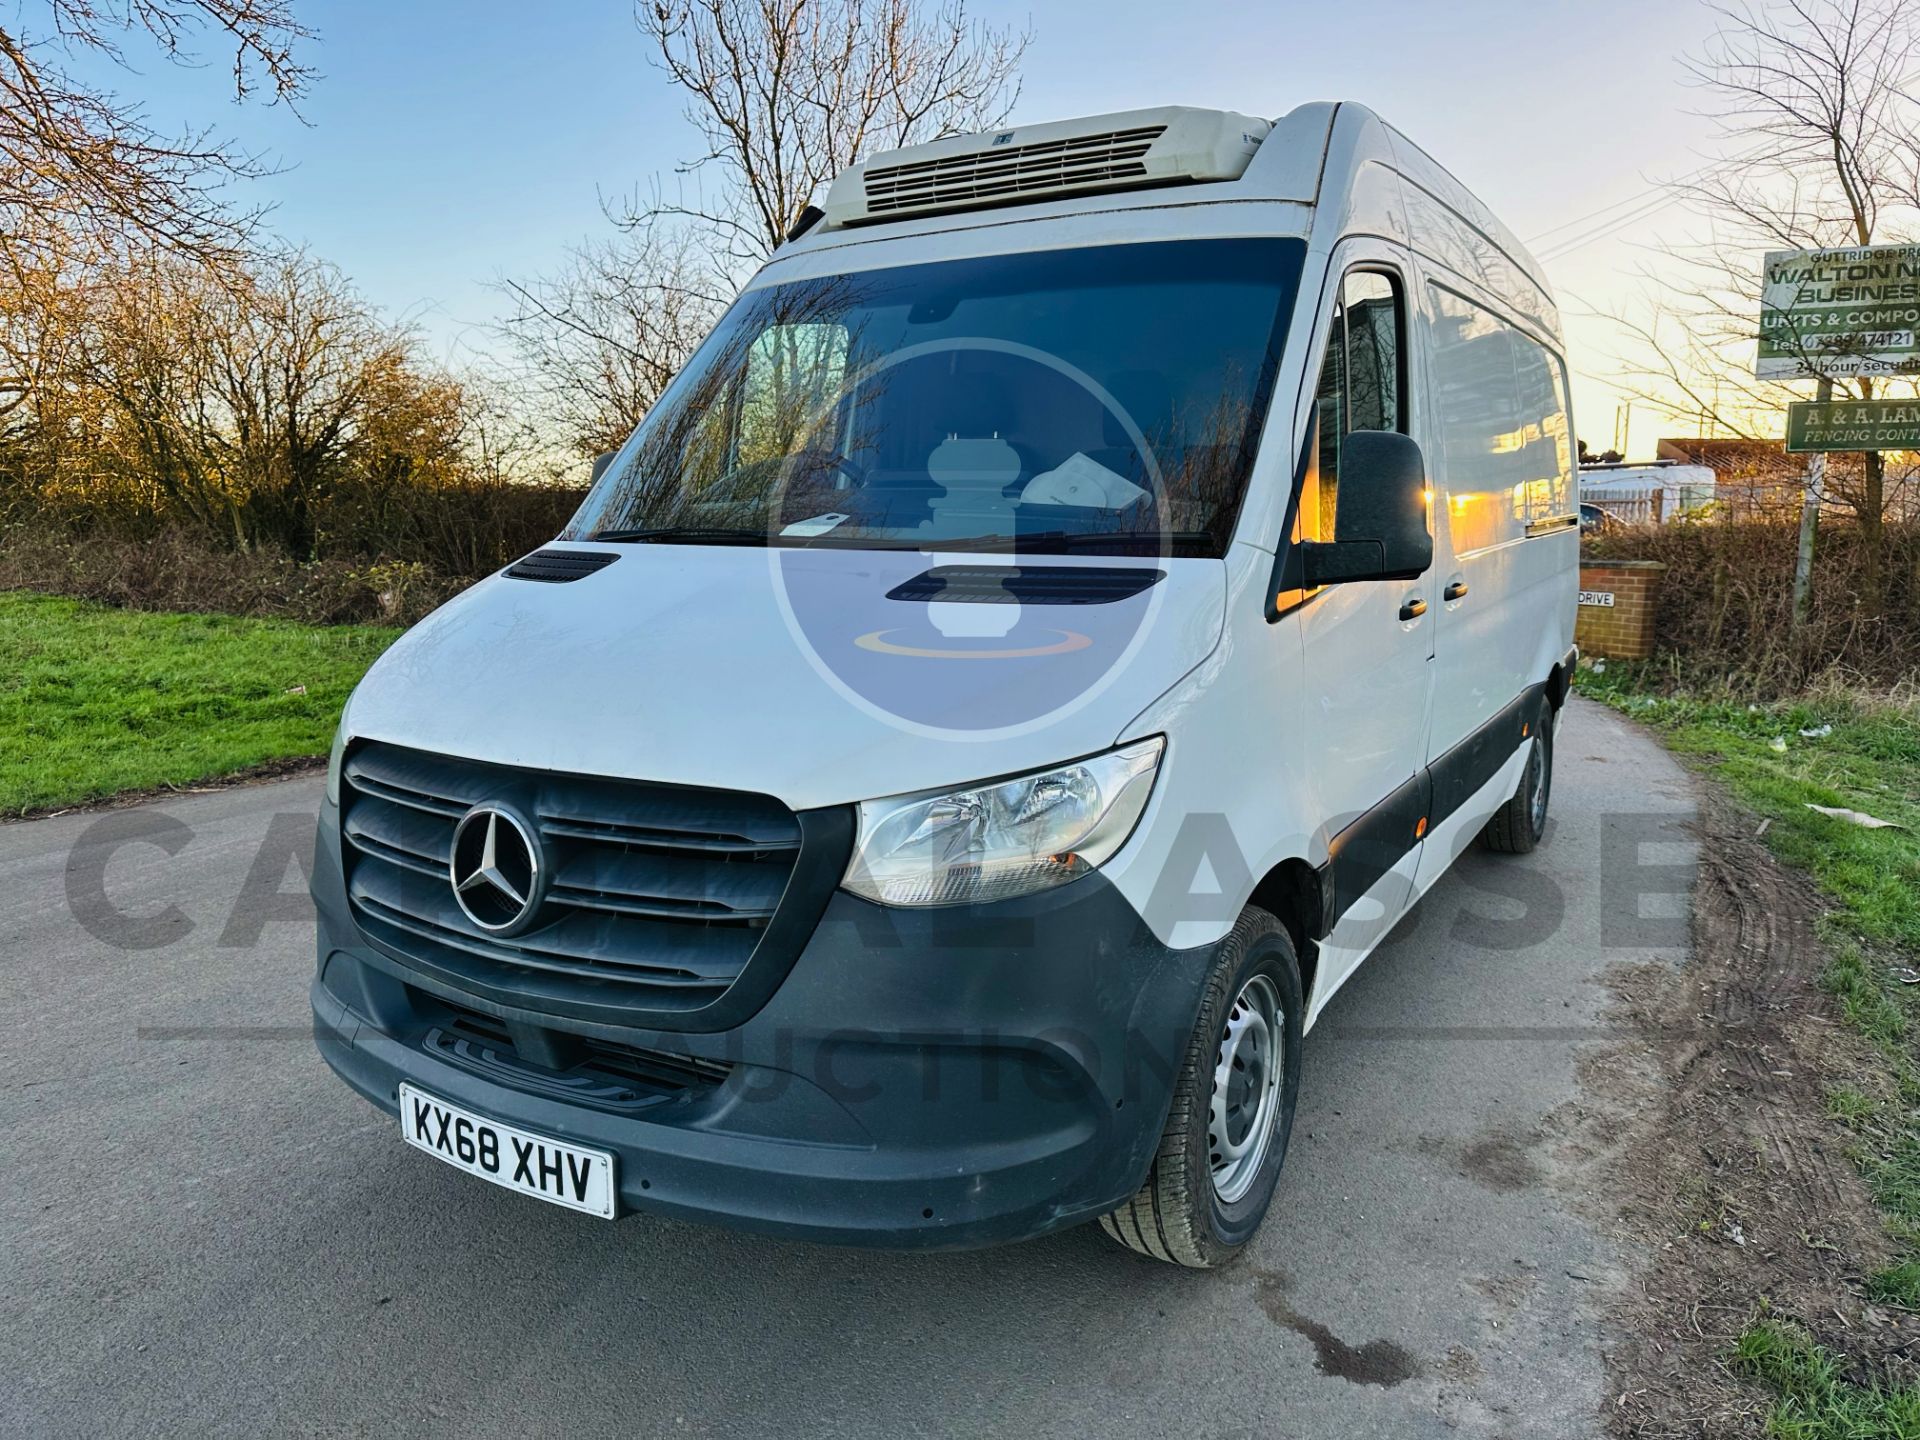 MERCEDES-BENZ SPRINTER 314 CDI *MWB - REFRIGERATED VAN* (2019 - FACELIFT MODEL) *OVERNIGHT STANDBY* - Image 4 of 32